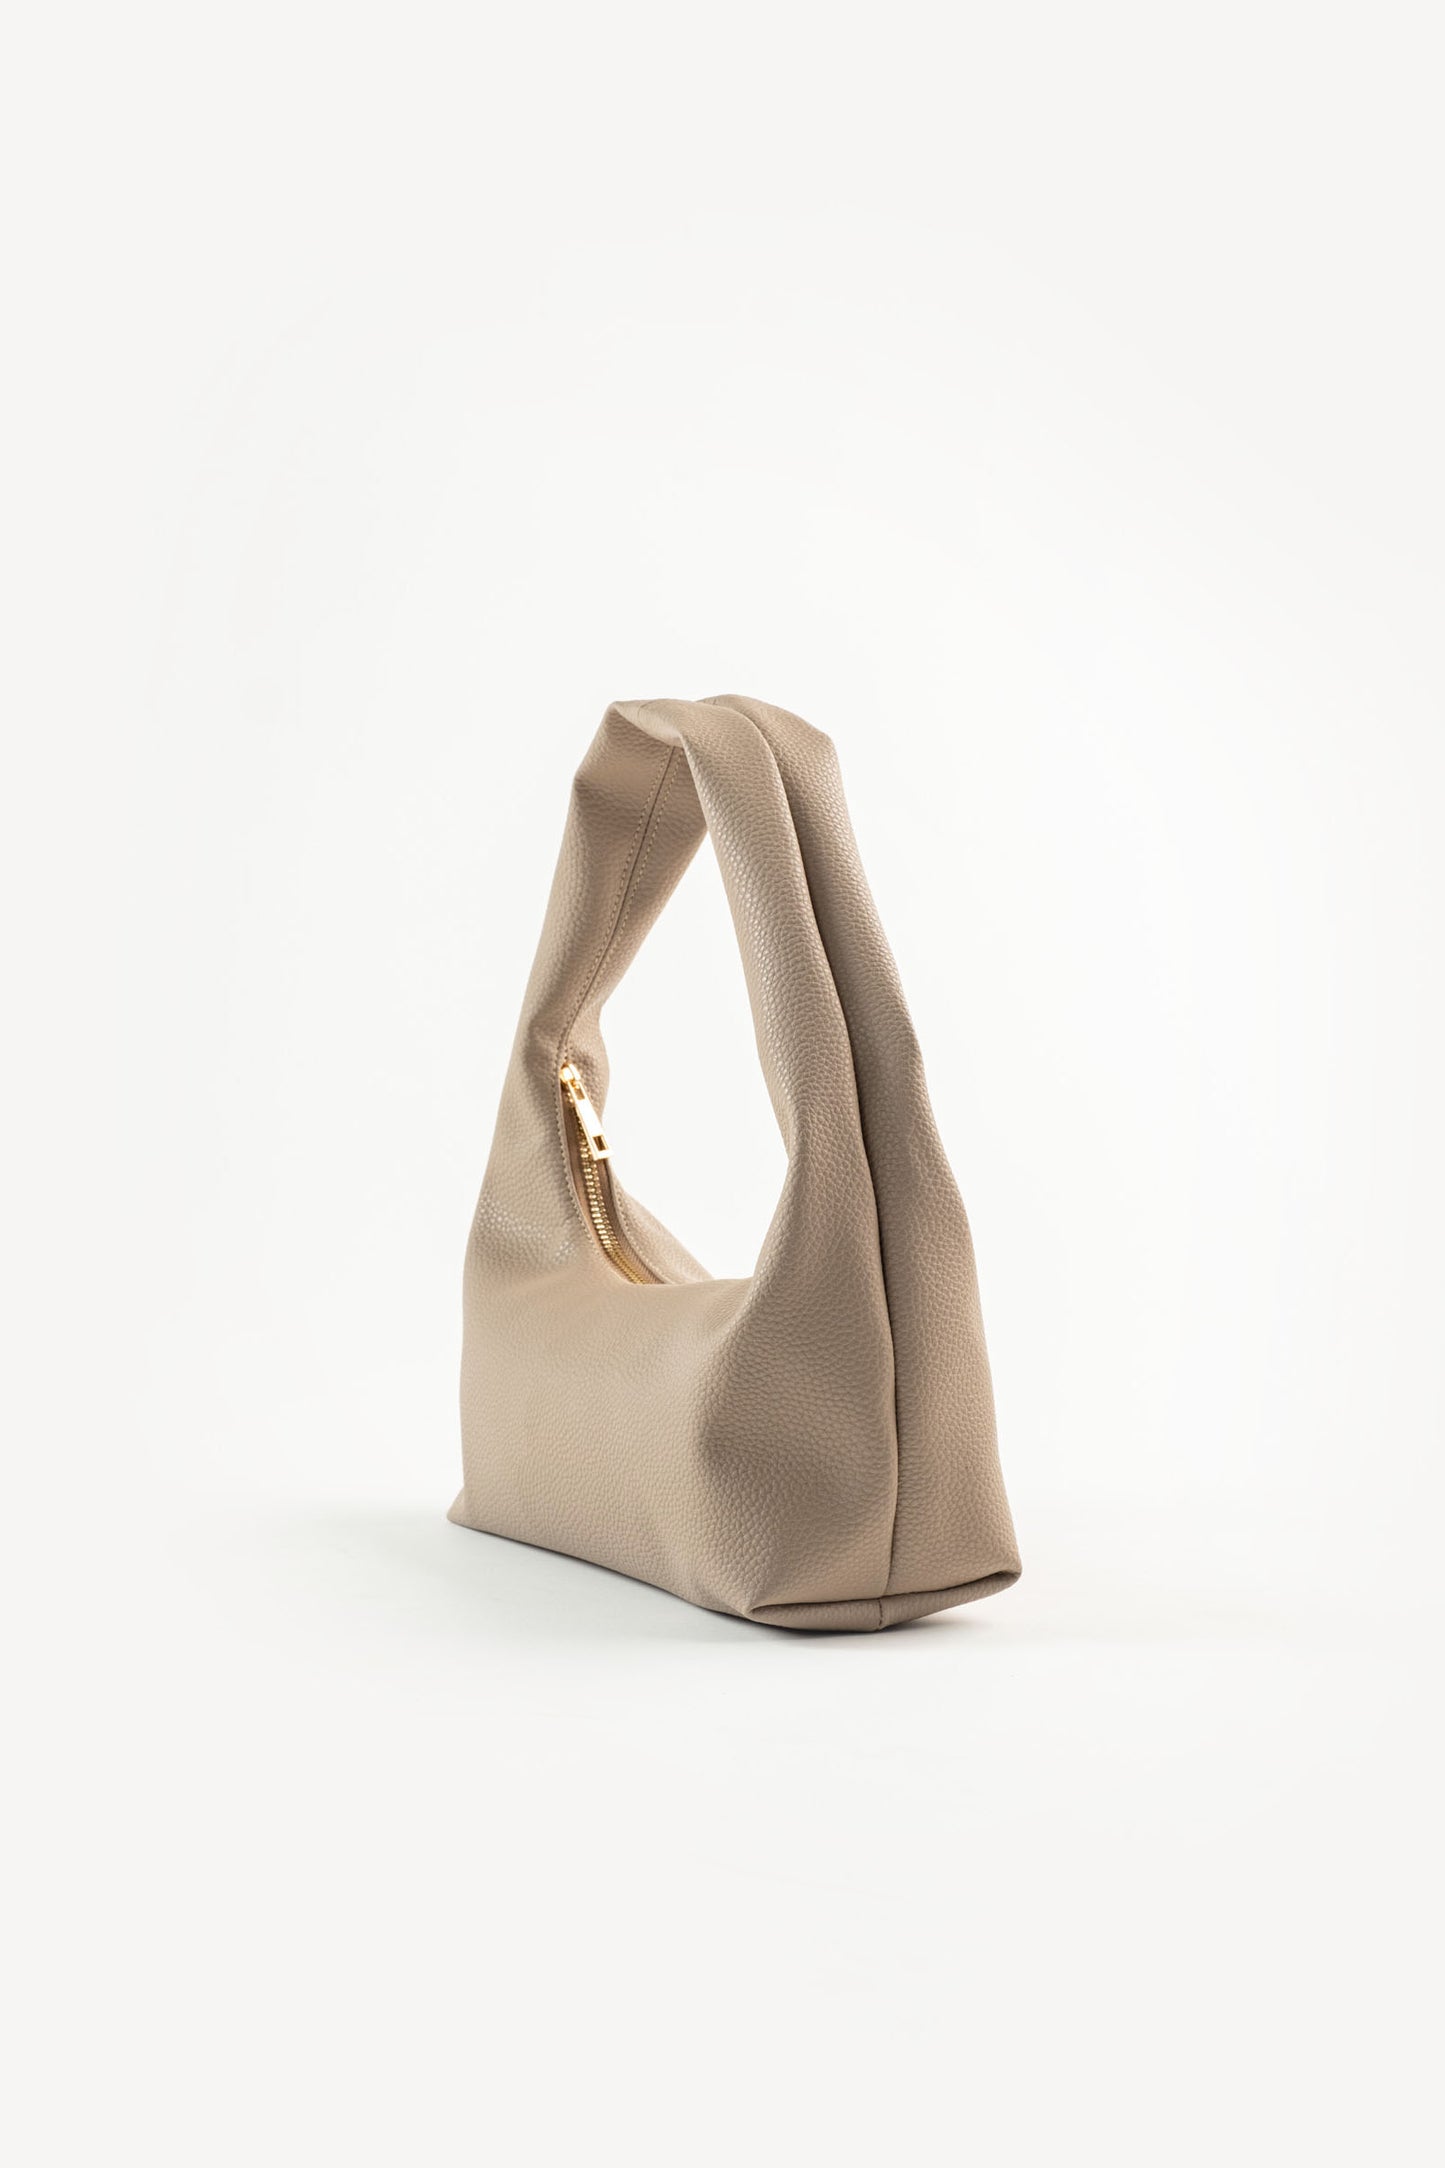 Small Hobo Bag in Taupe (Pre-Order)